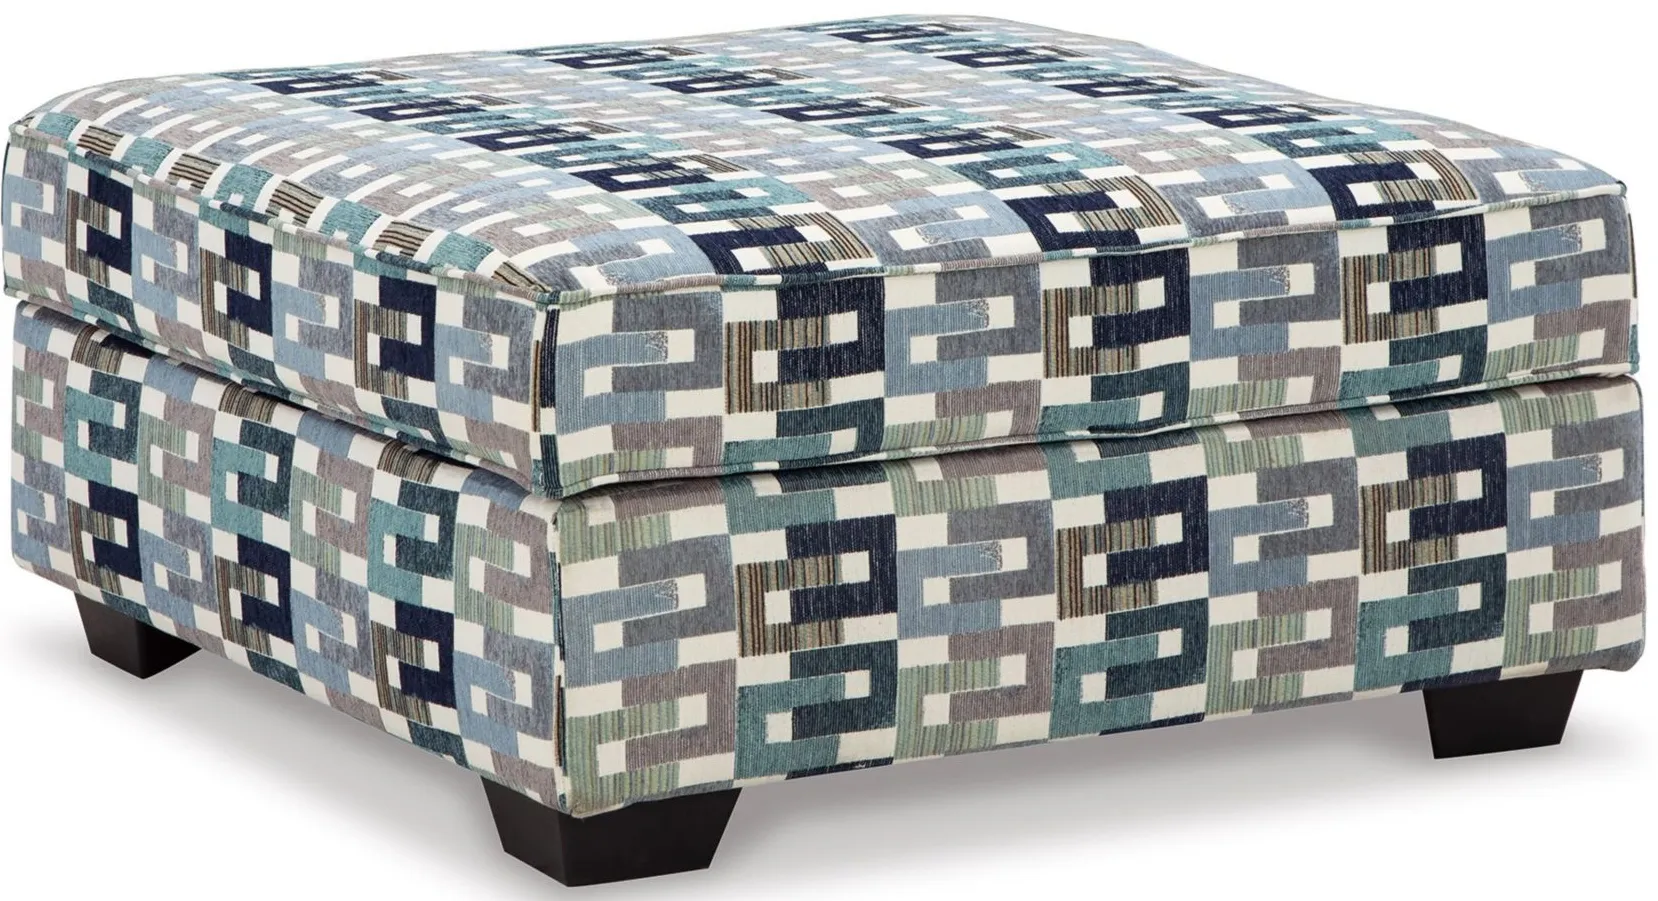 Valerano Ottoman With Storage in Parchment by Ashley Furniture